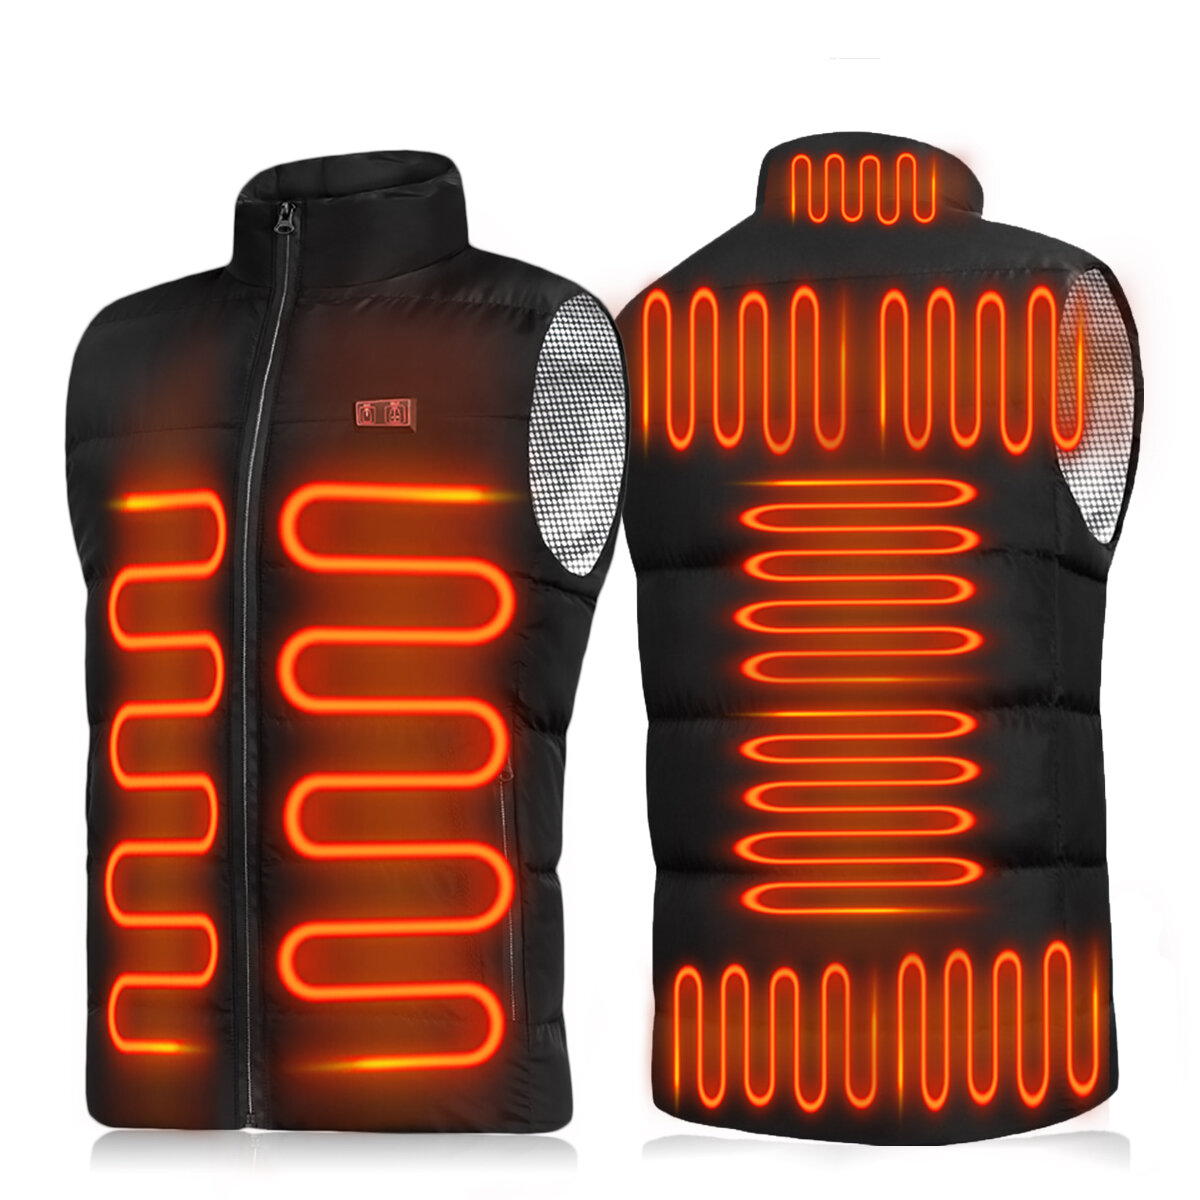 Image of 9-Heating Double-button Control Electric Jacket Man Woman Heated Winter Warm Hooded Coat Vest